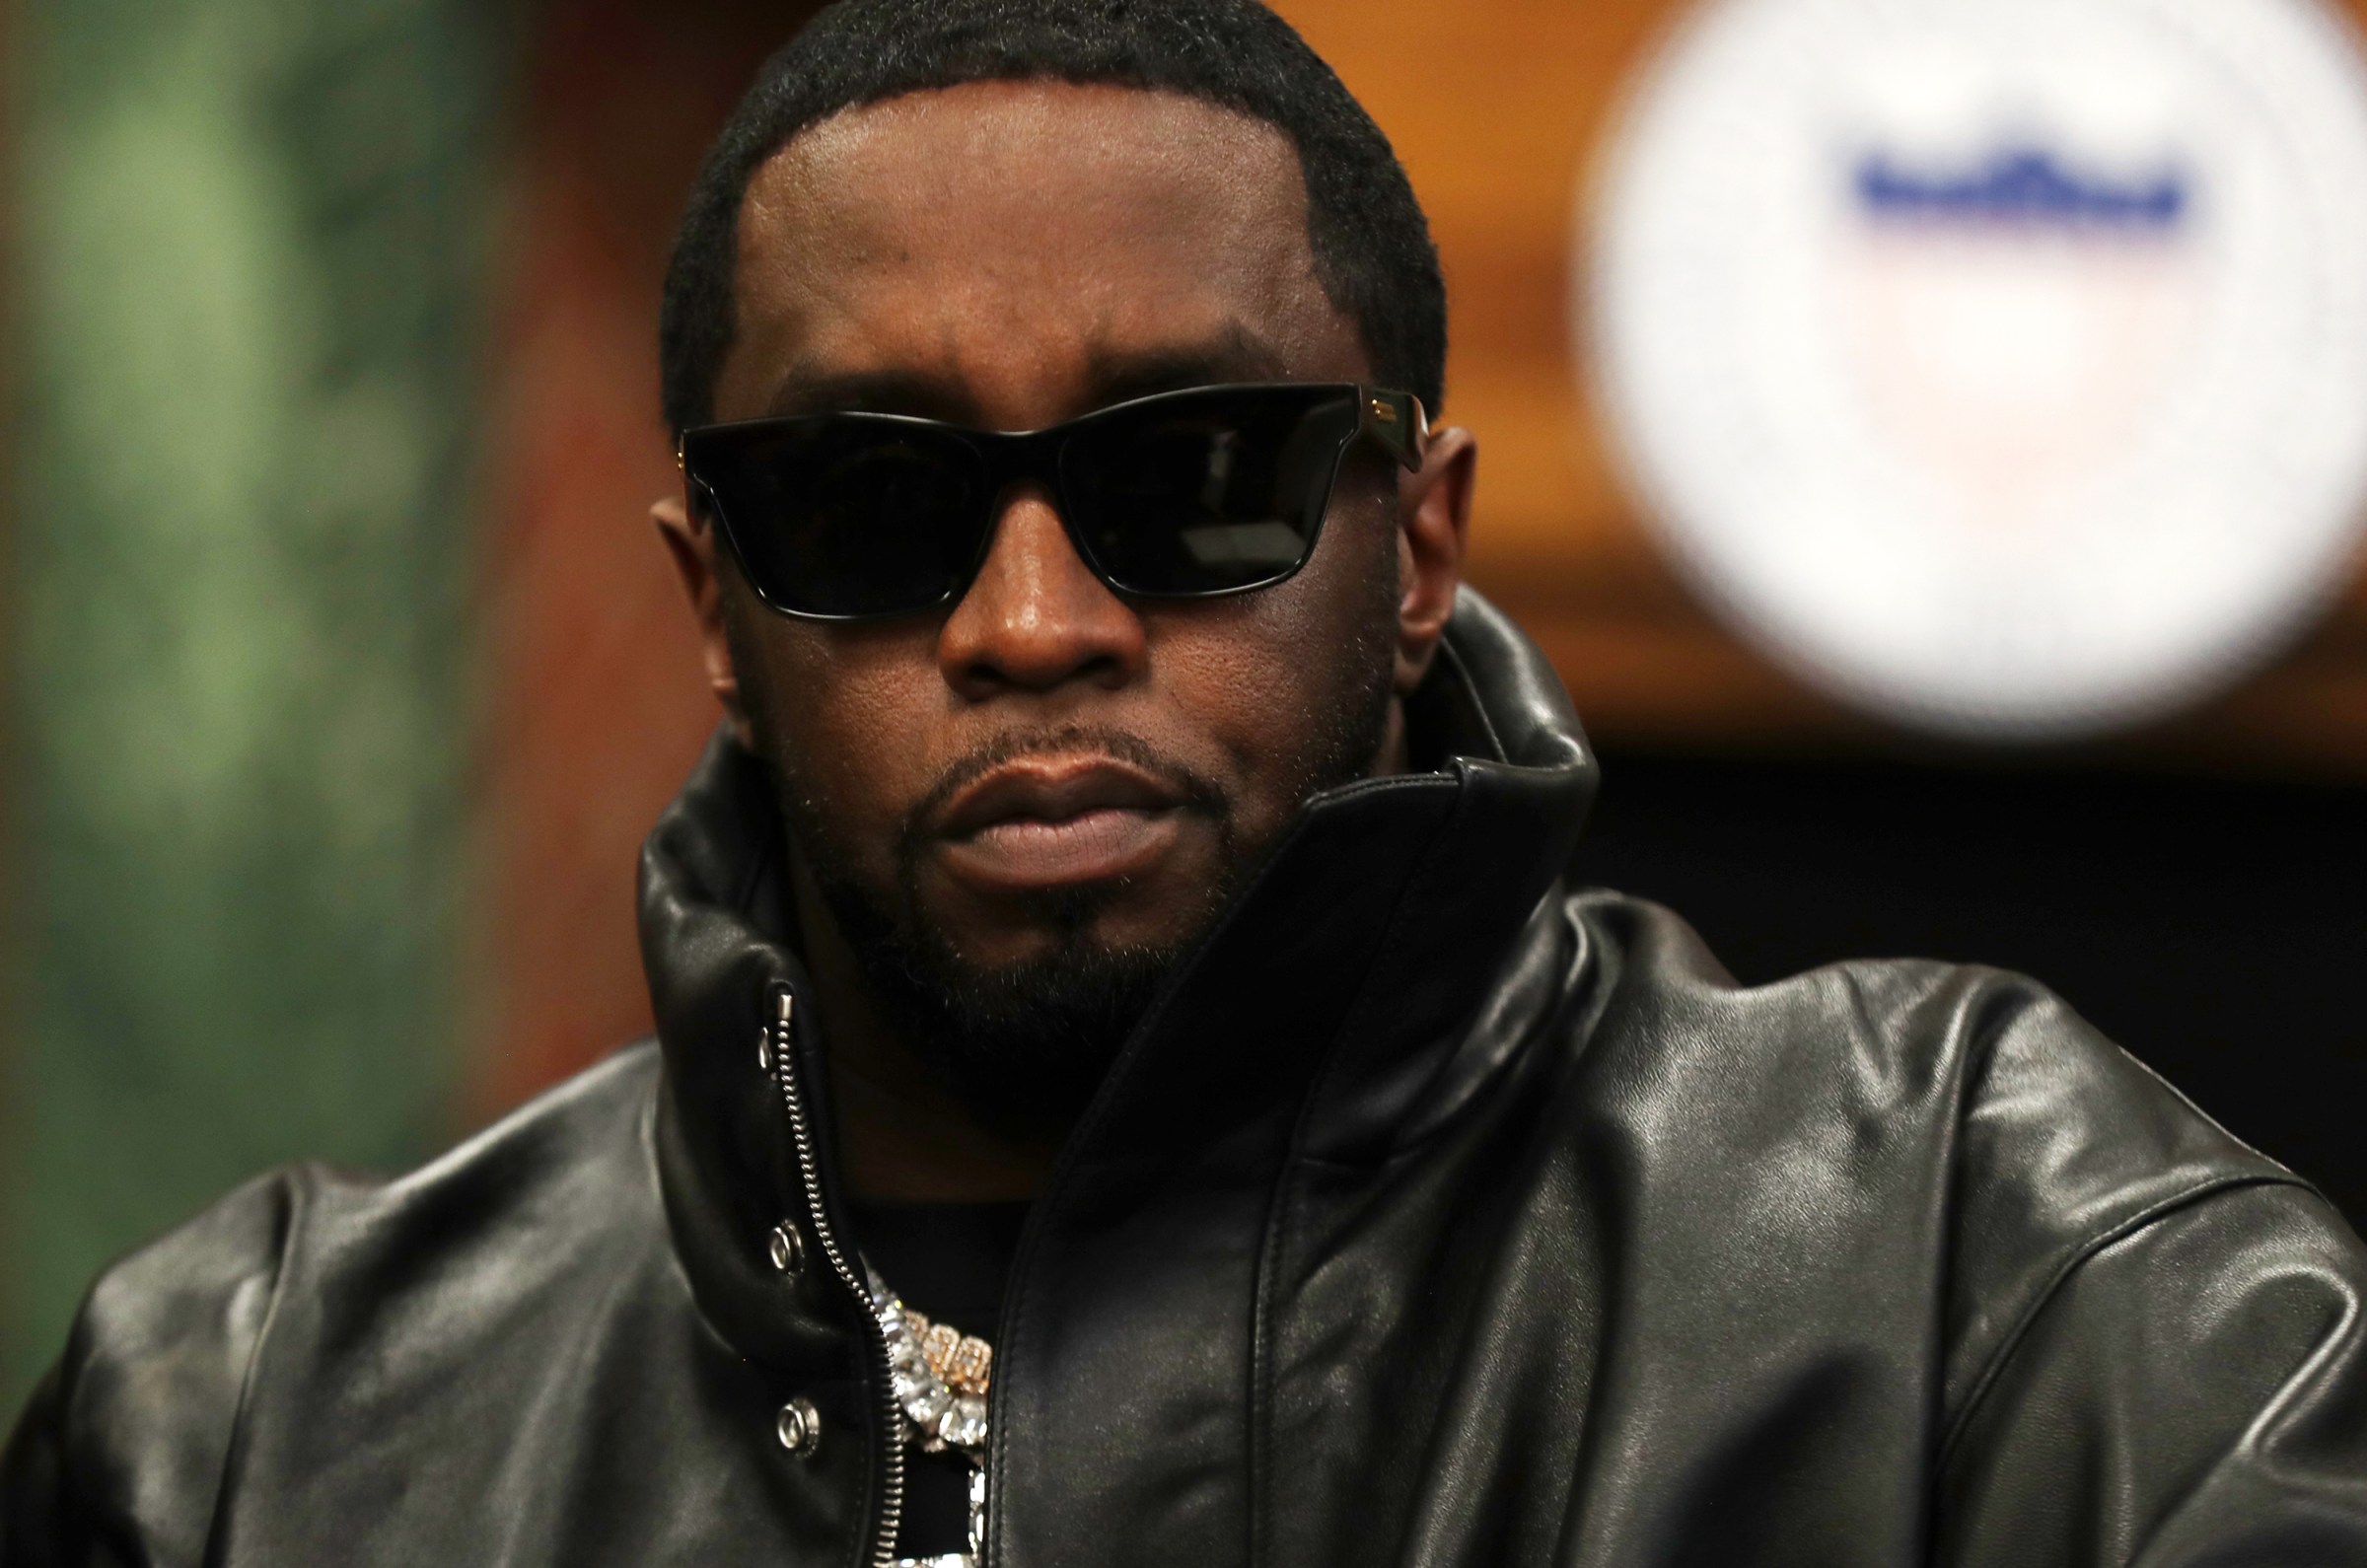 The video where Diddy attacks Cassie — and the allegations against him — explained